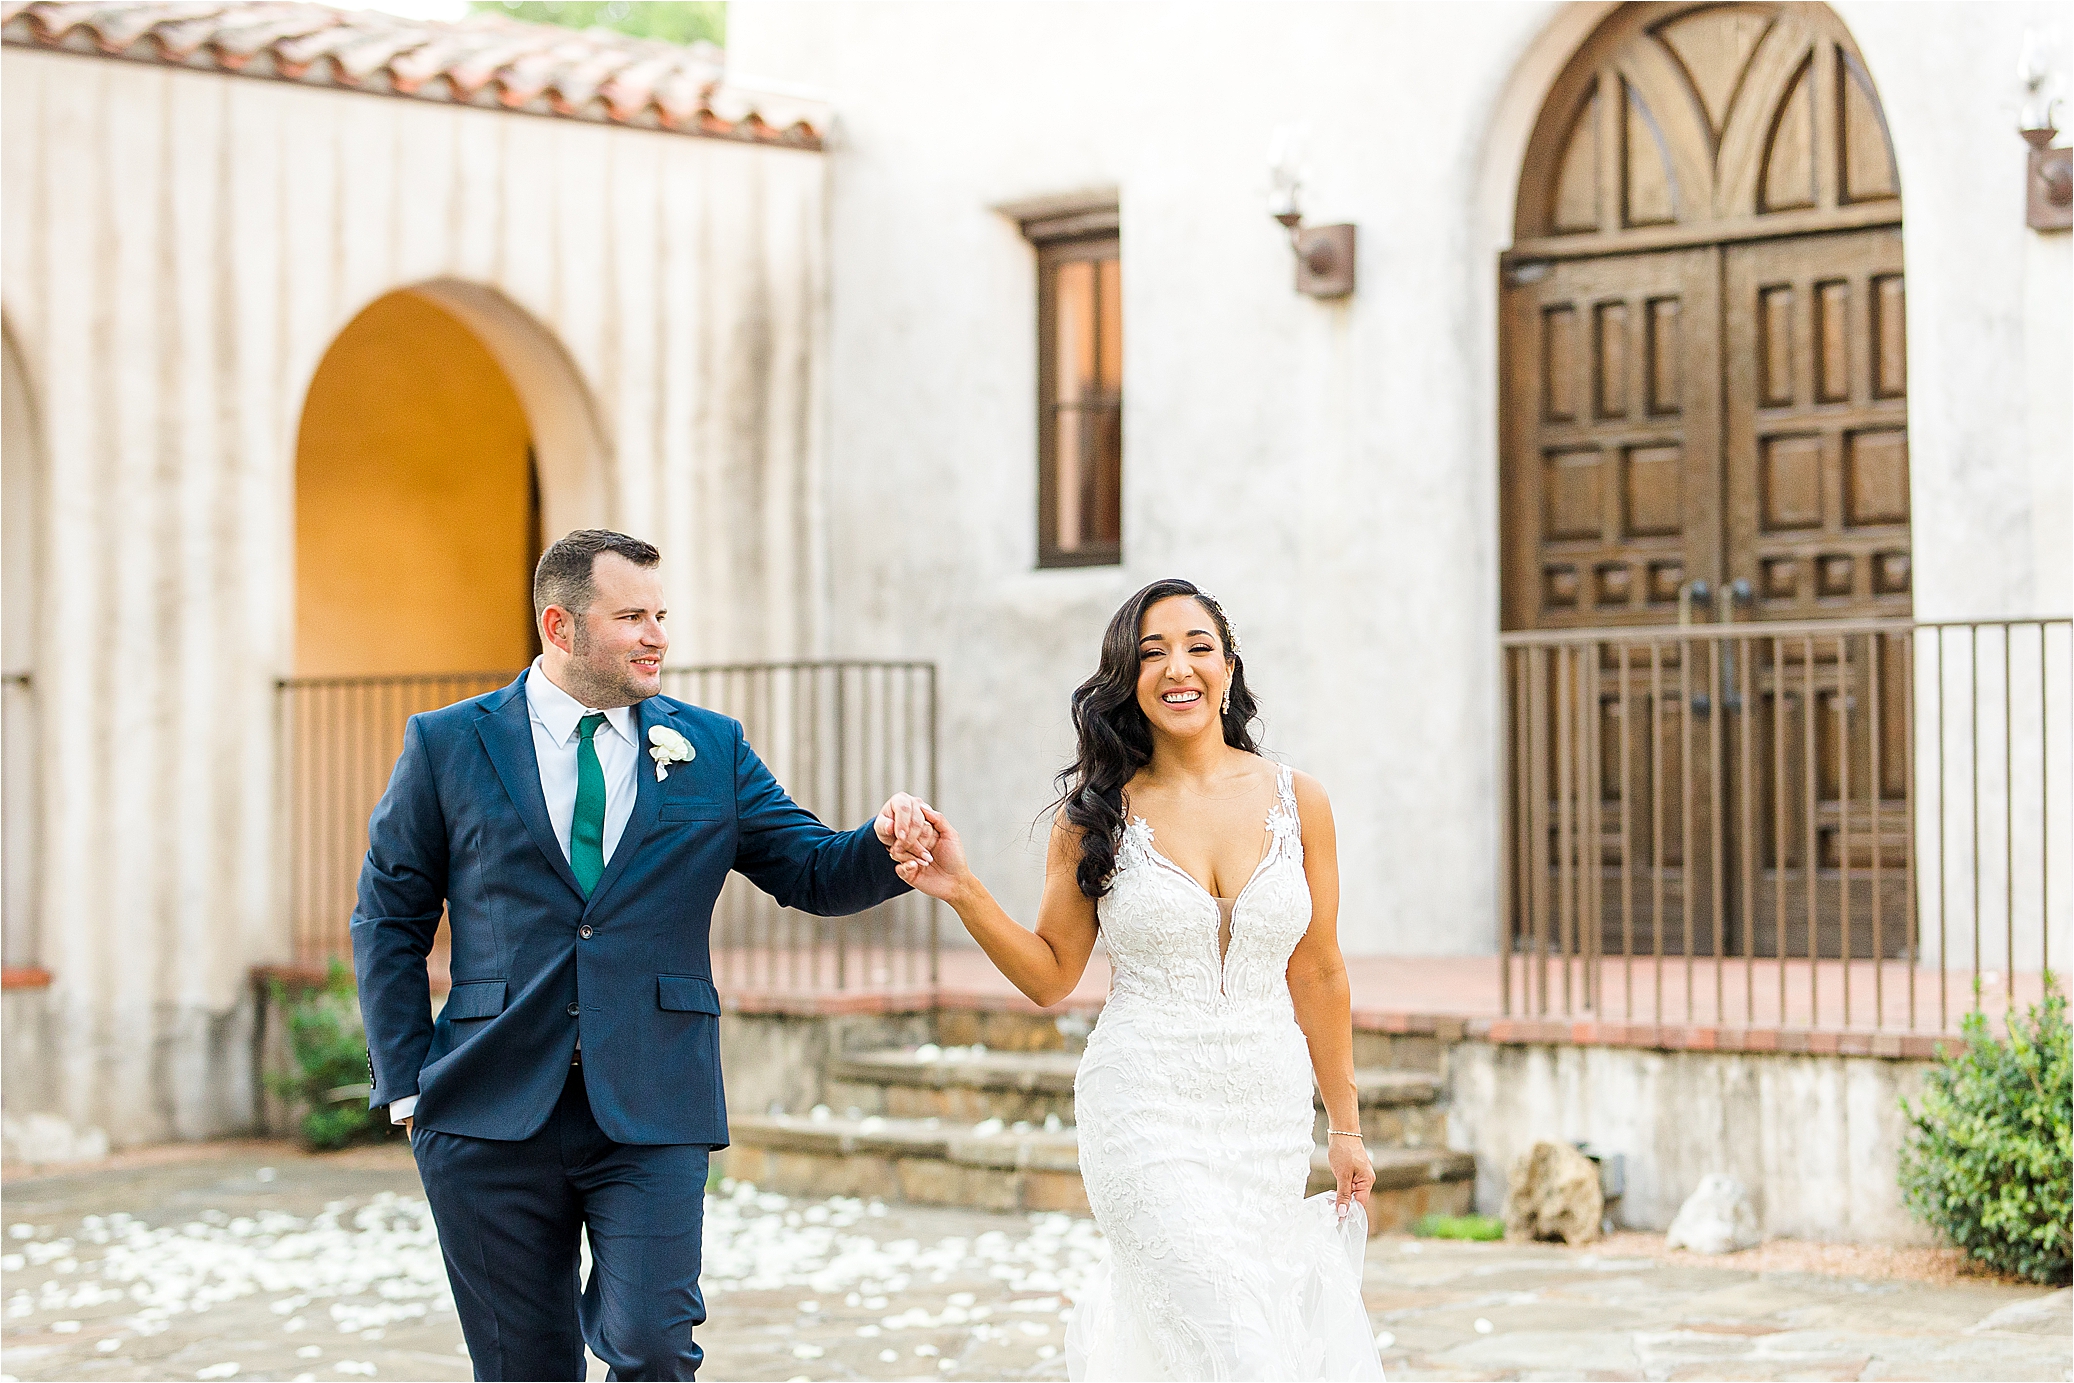 A newlywed couple walks toward the camera and smiles in front of Mission Style Chapel near San Antonio, Texas 